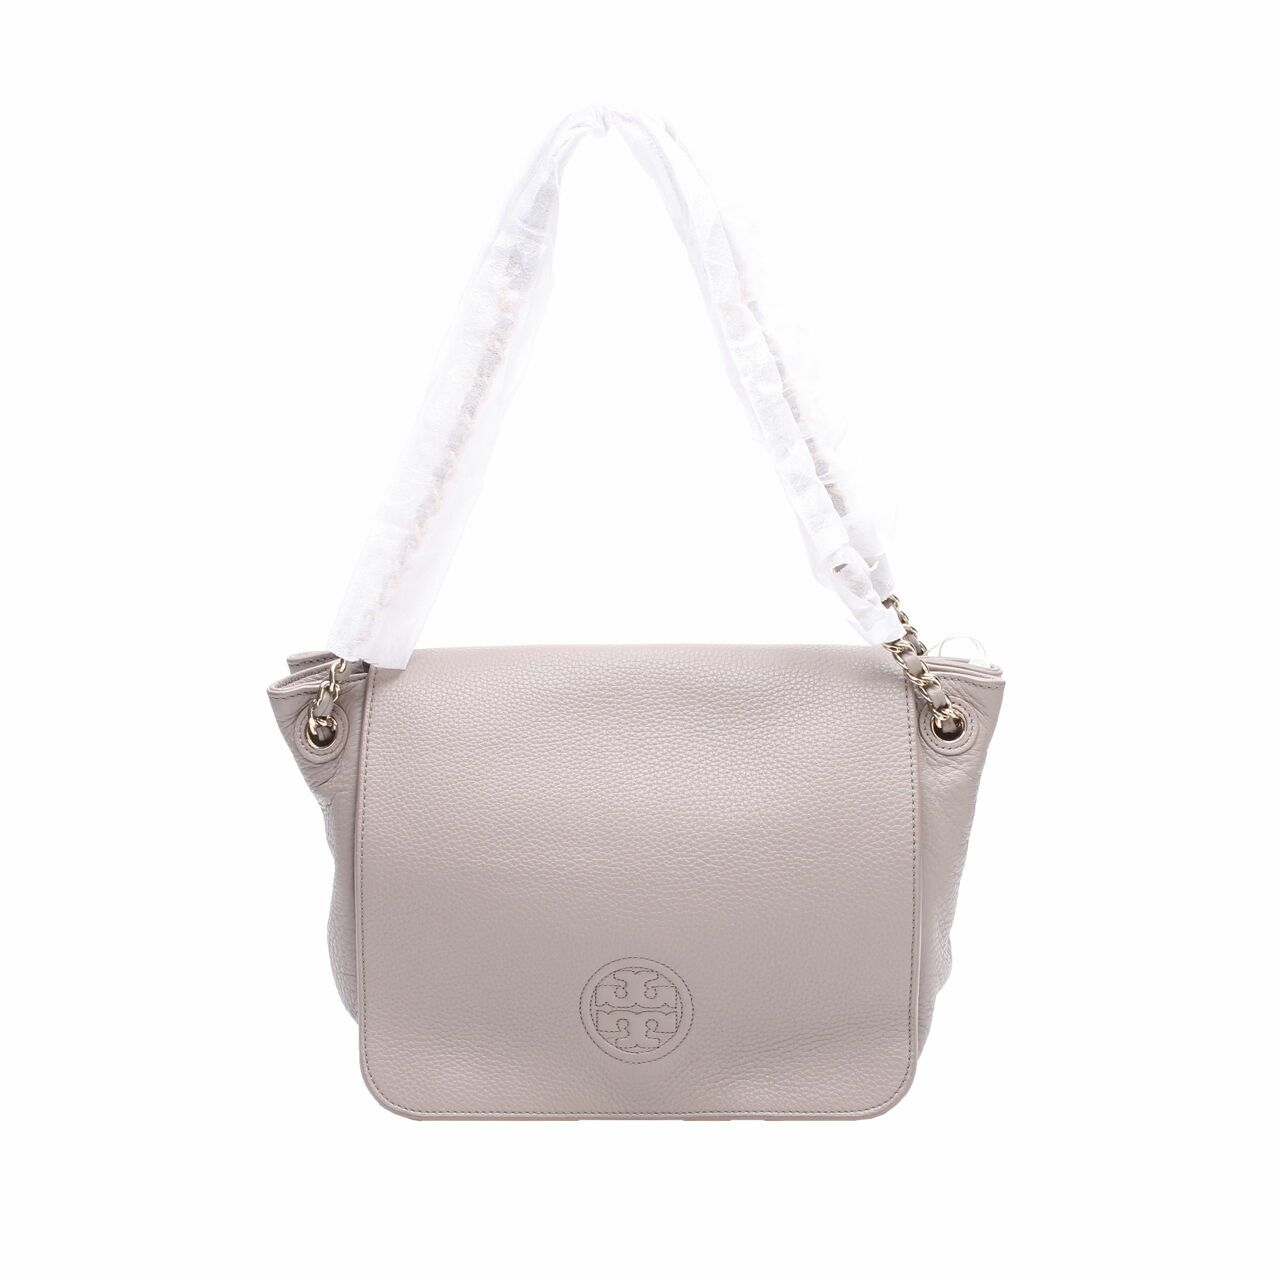 Tory Burch Bombe Small Flap French Gray Shoulder Bag